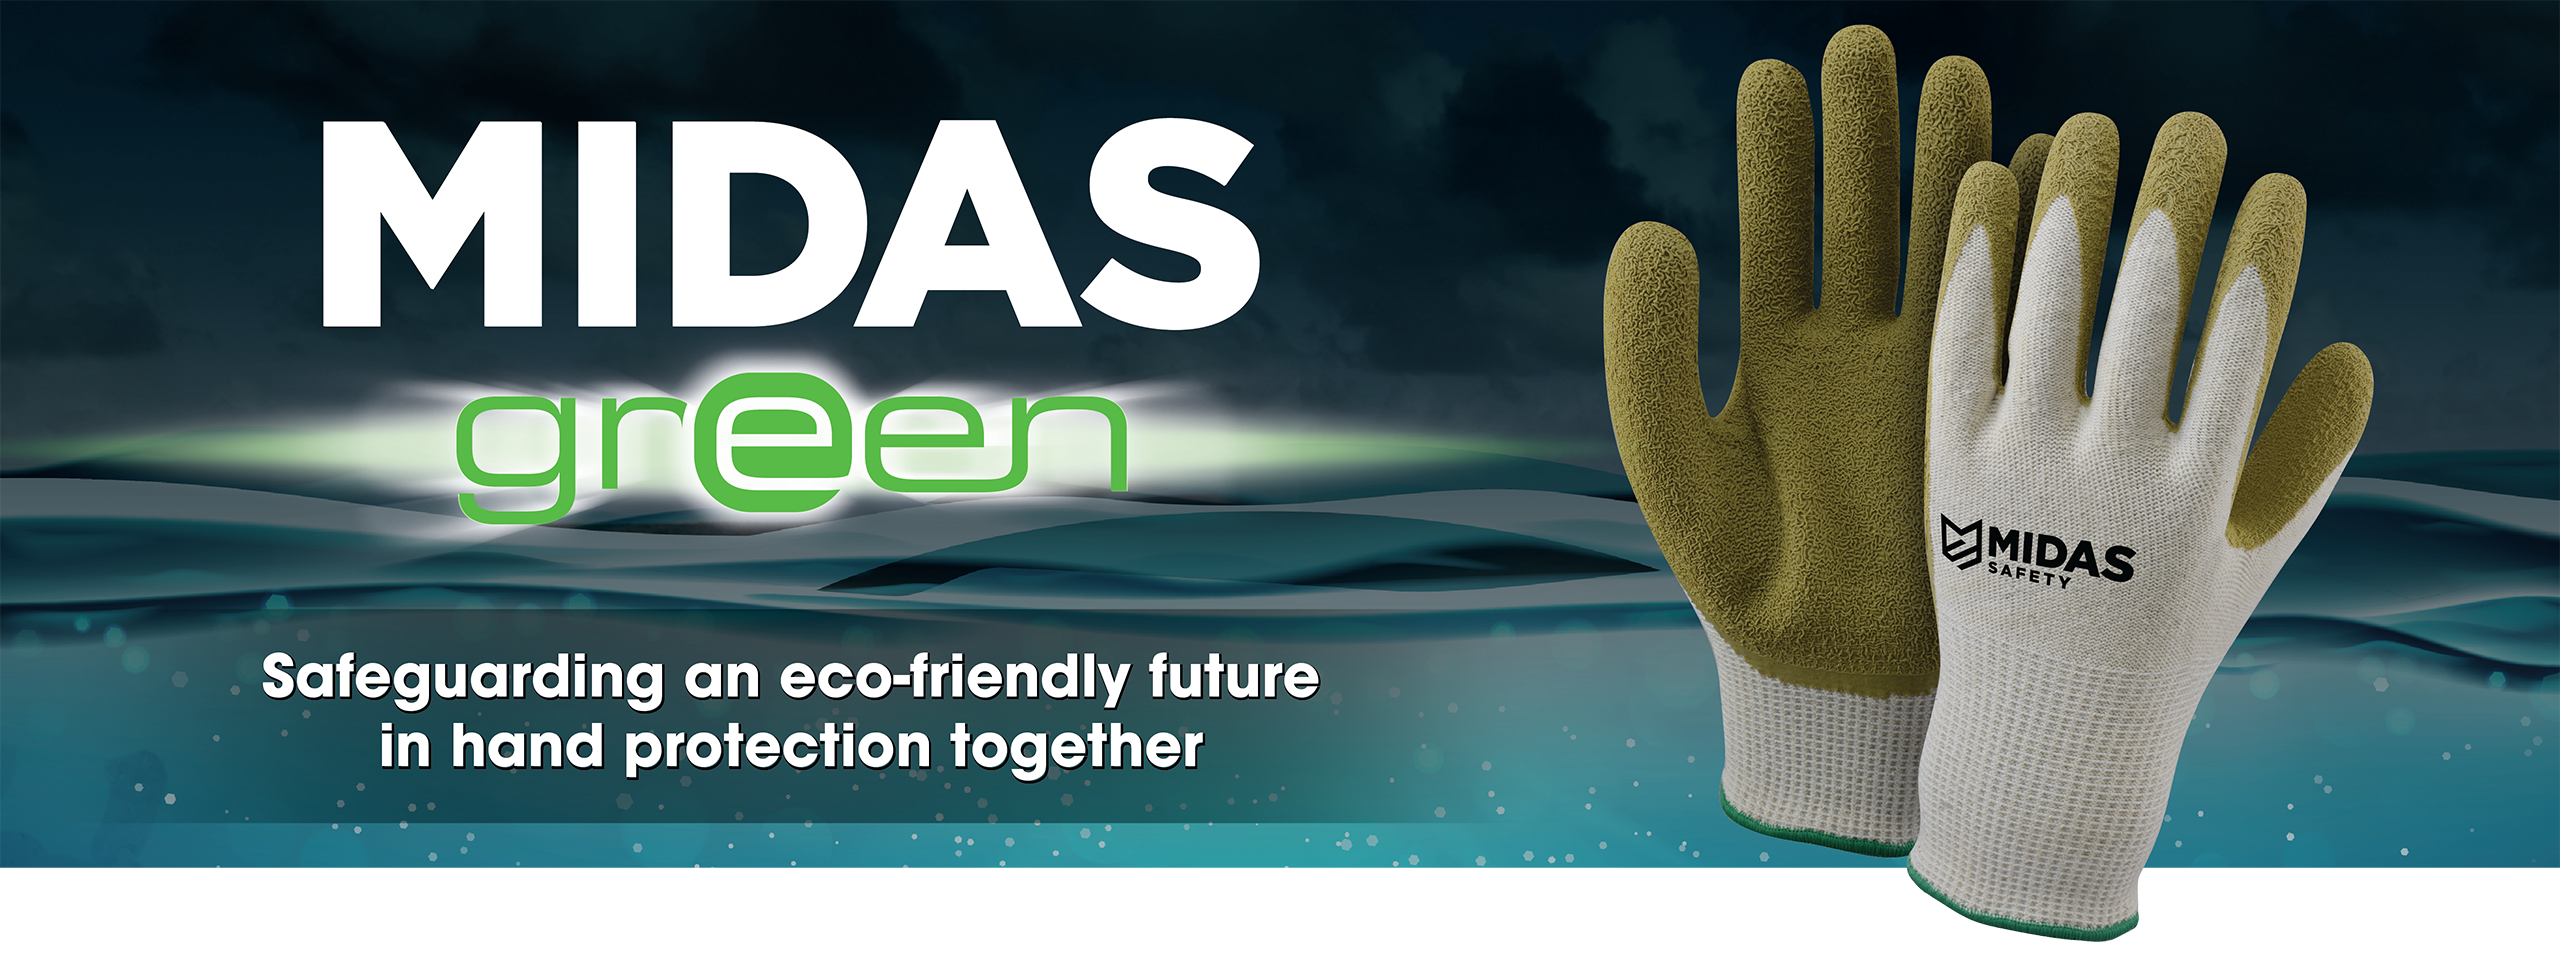 Midas Green - Safeguarding an eco-friendly future in hand protection together